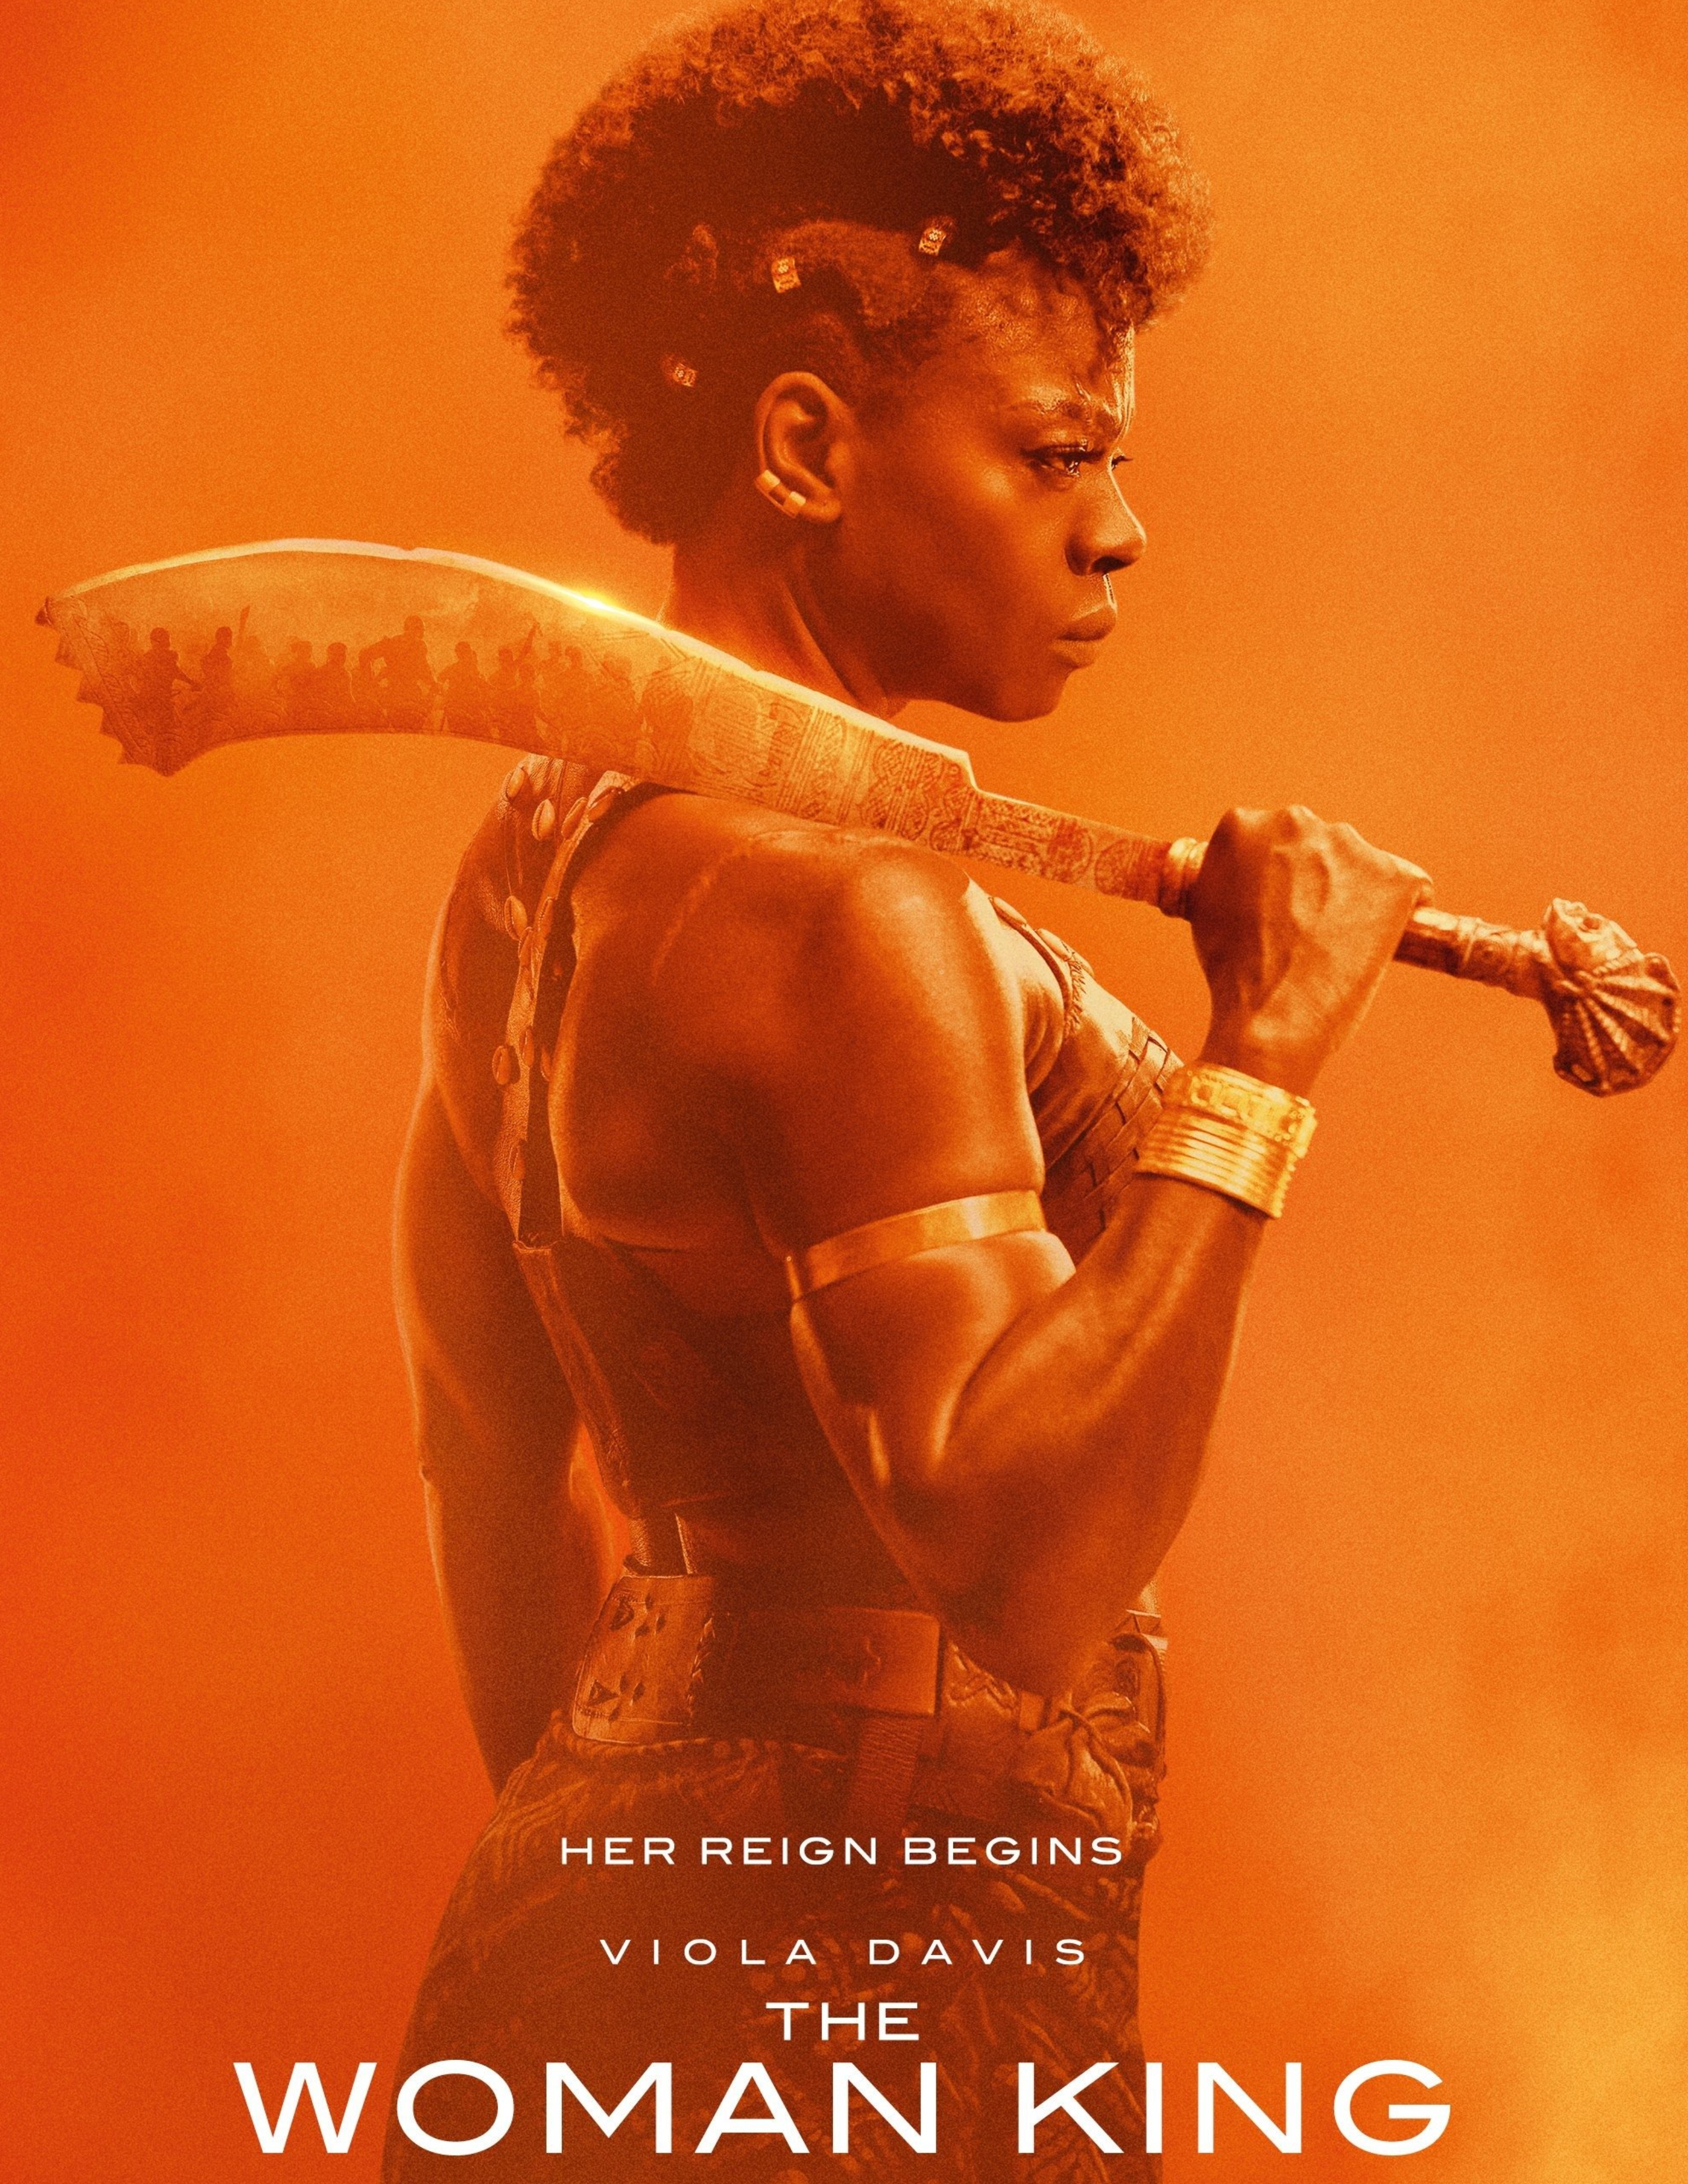 The Woman King Starring Viola Davis Based on a True Story Her Reign Begins